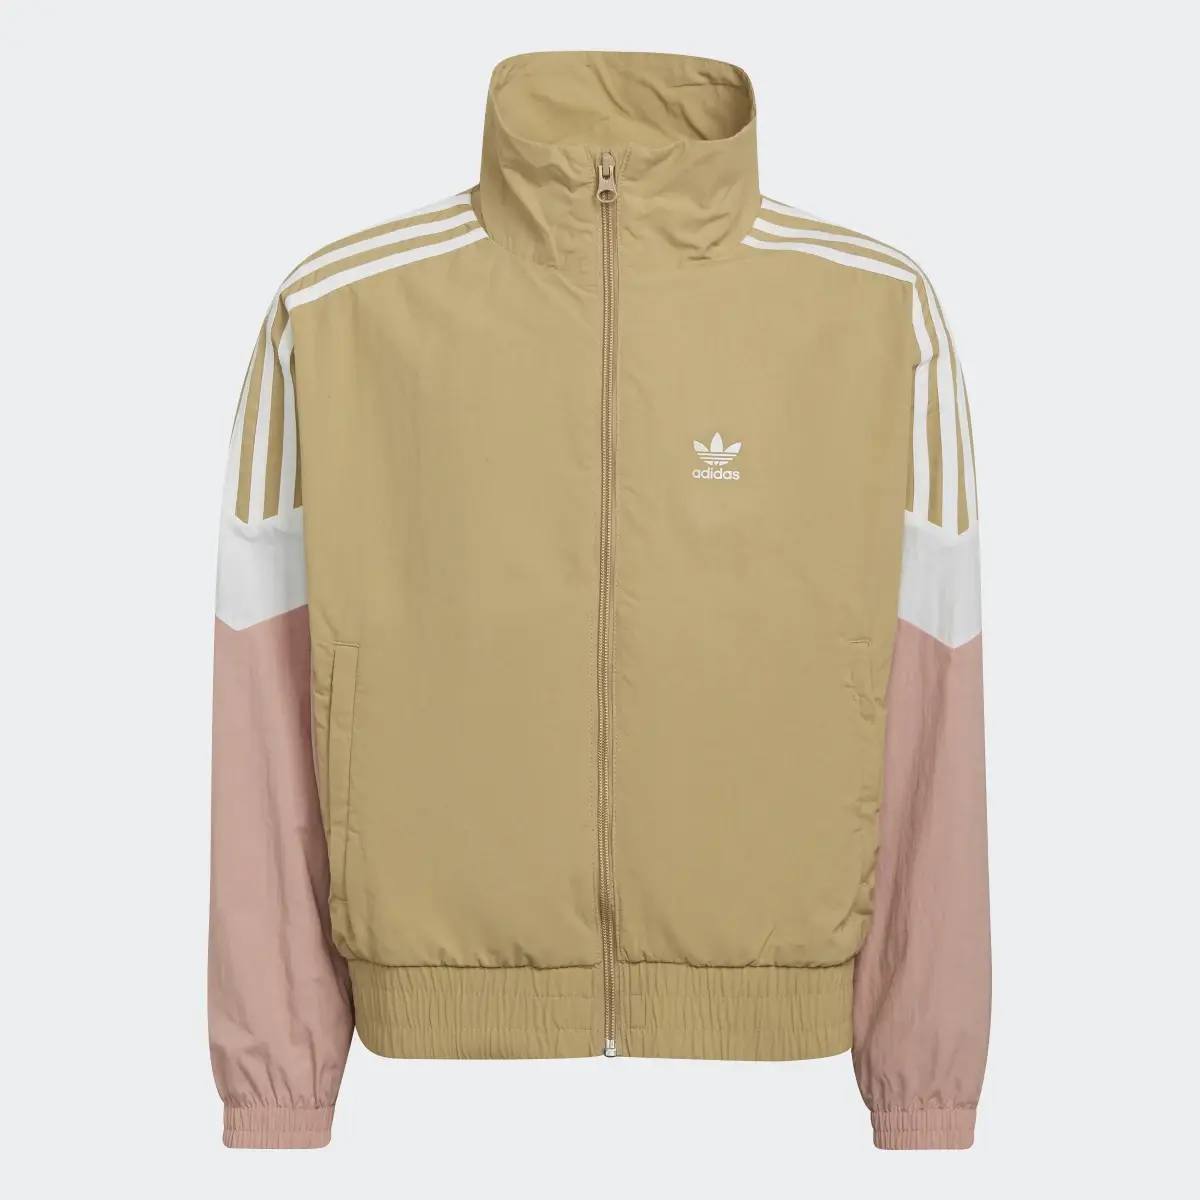 Adidas Woven Track Top. 1